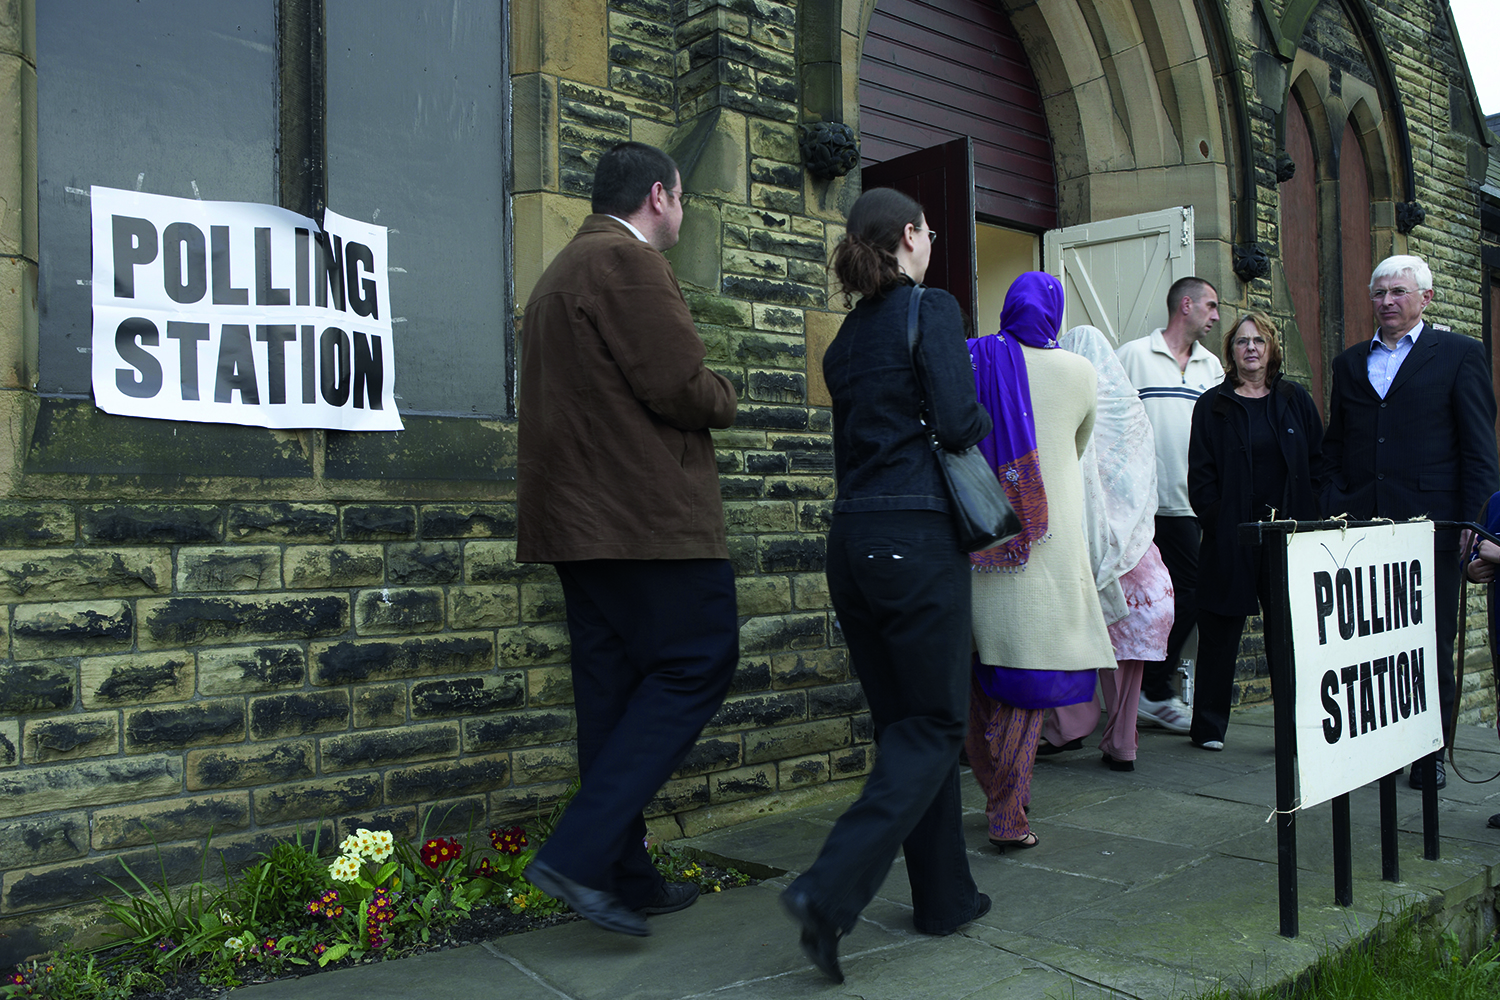 A crowd of people entering a polling station, situated within a local church. There are signs saying polling station on the outside